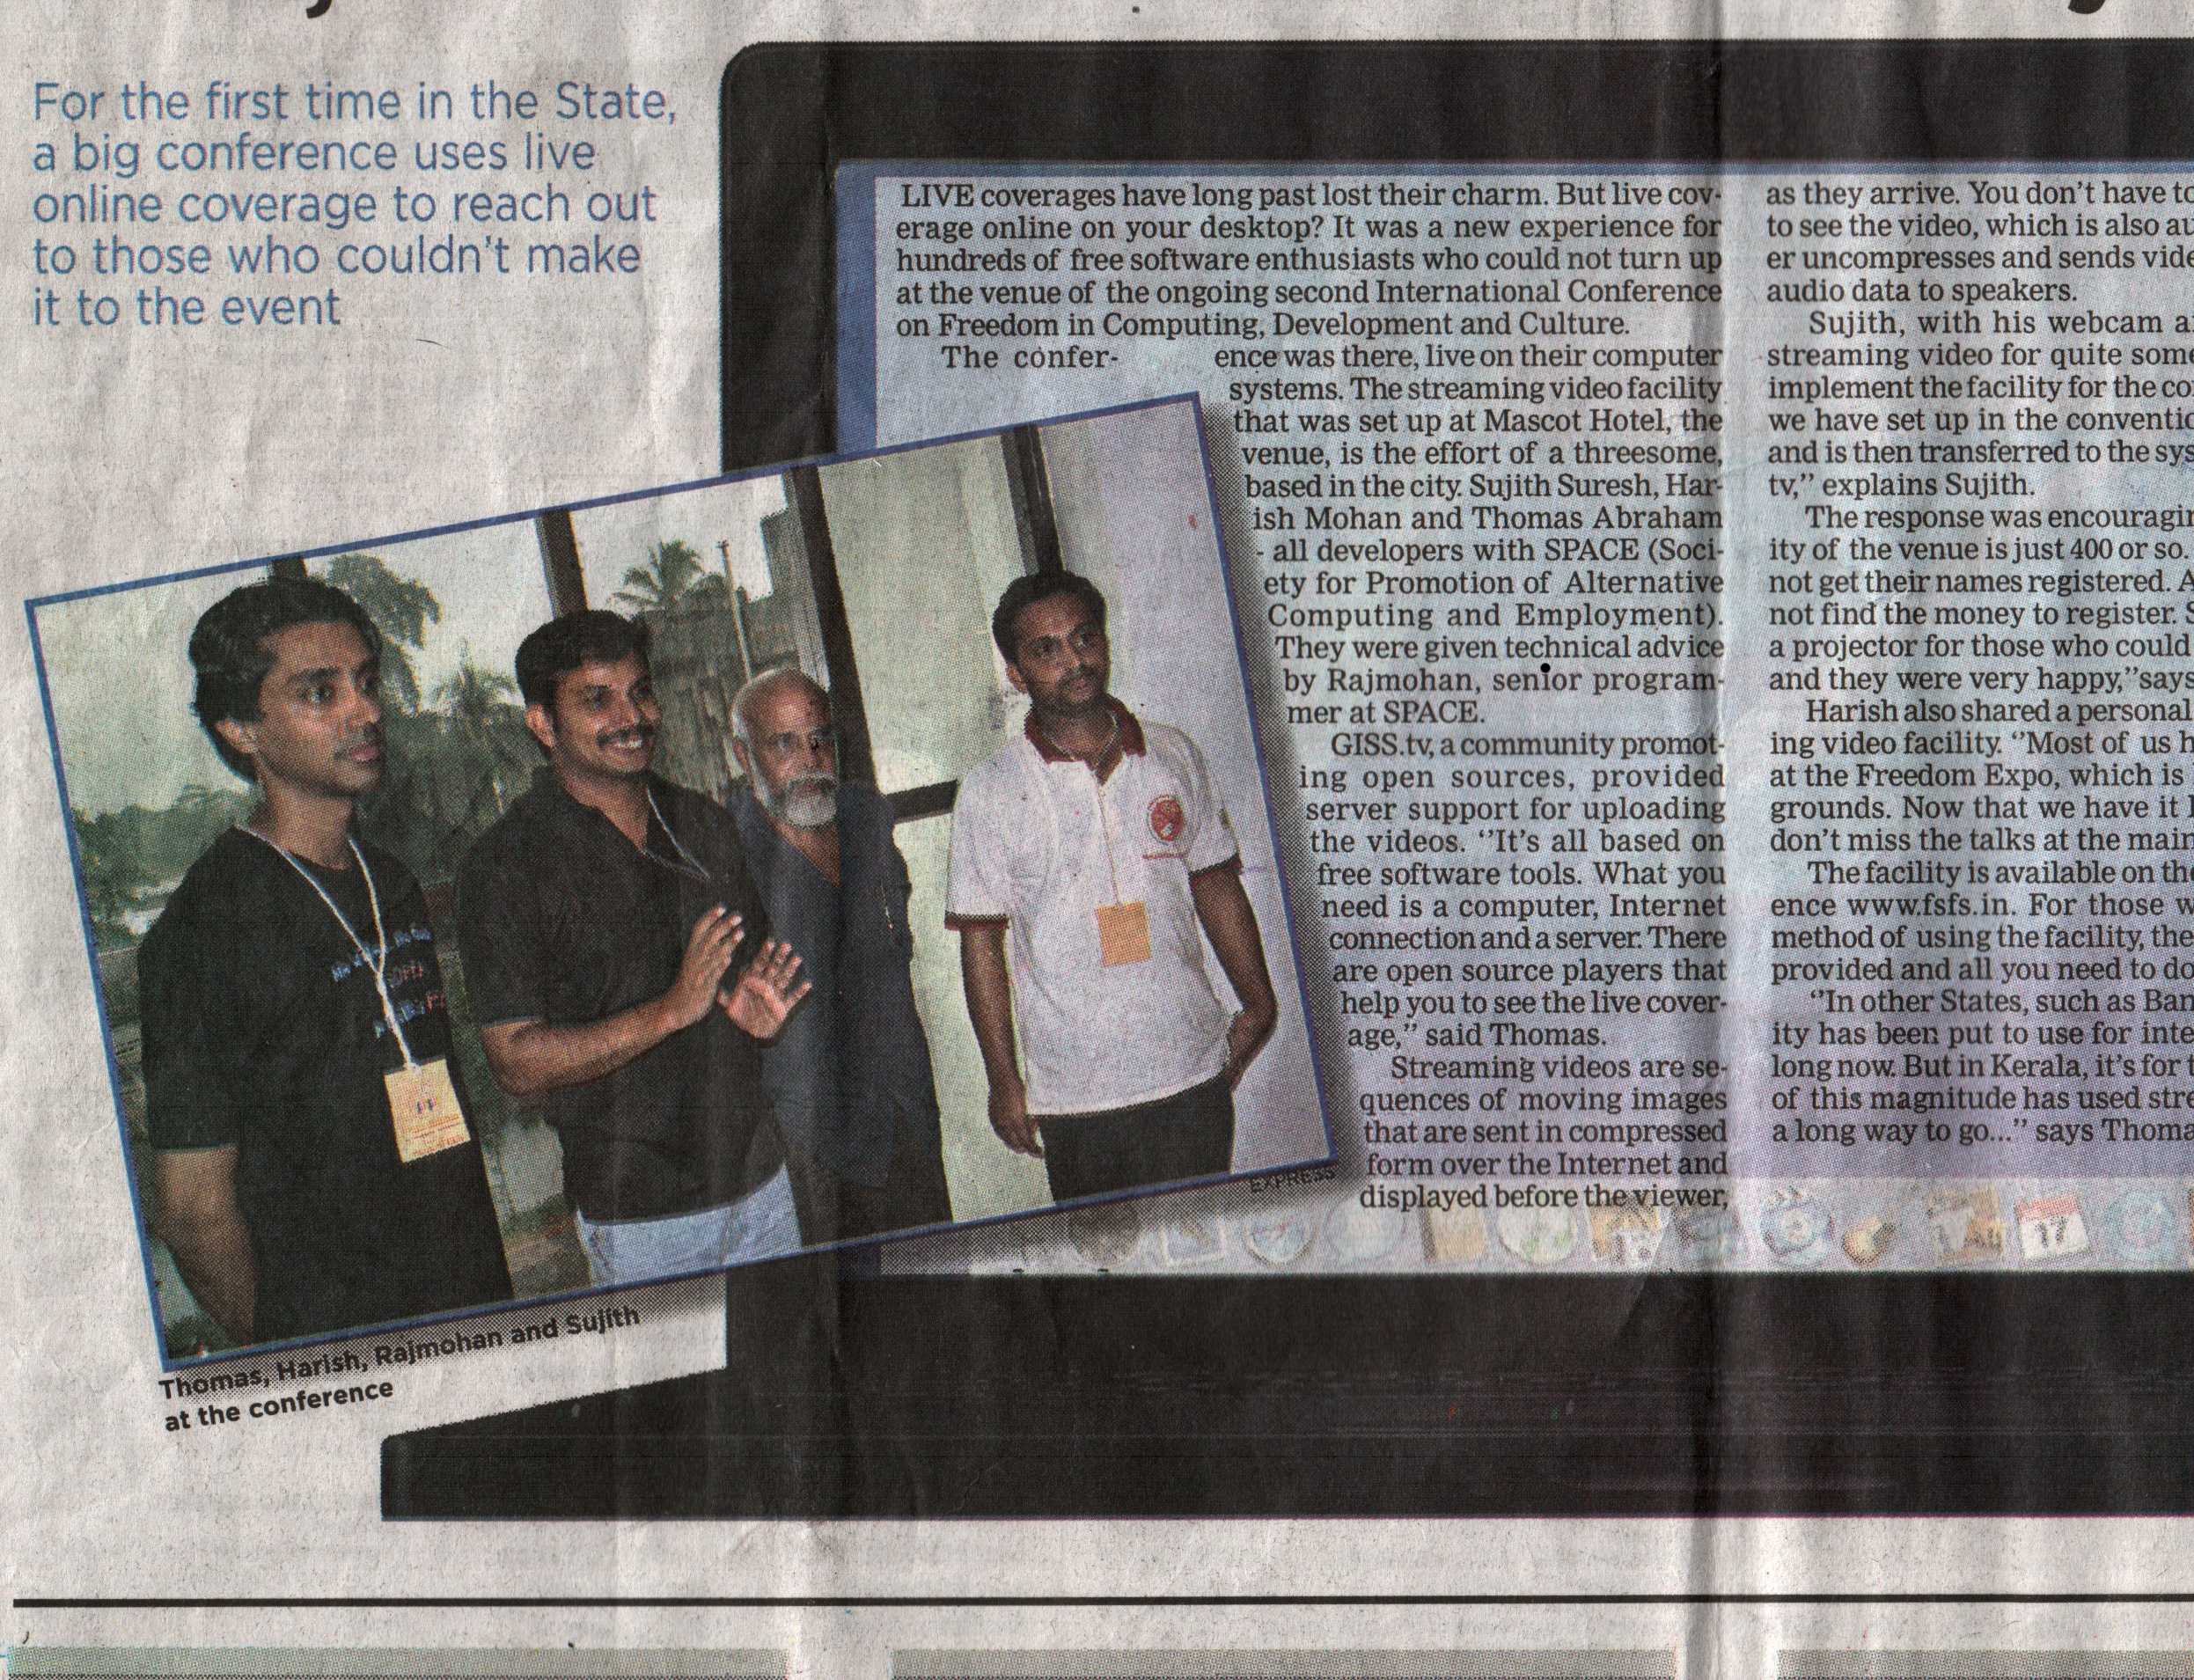 The news story on SPACE team in the Indian Express